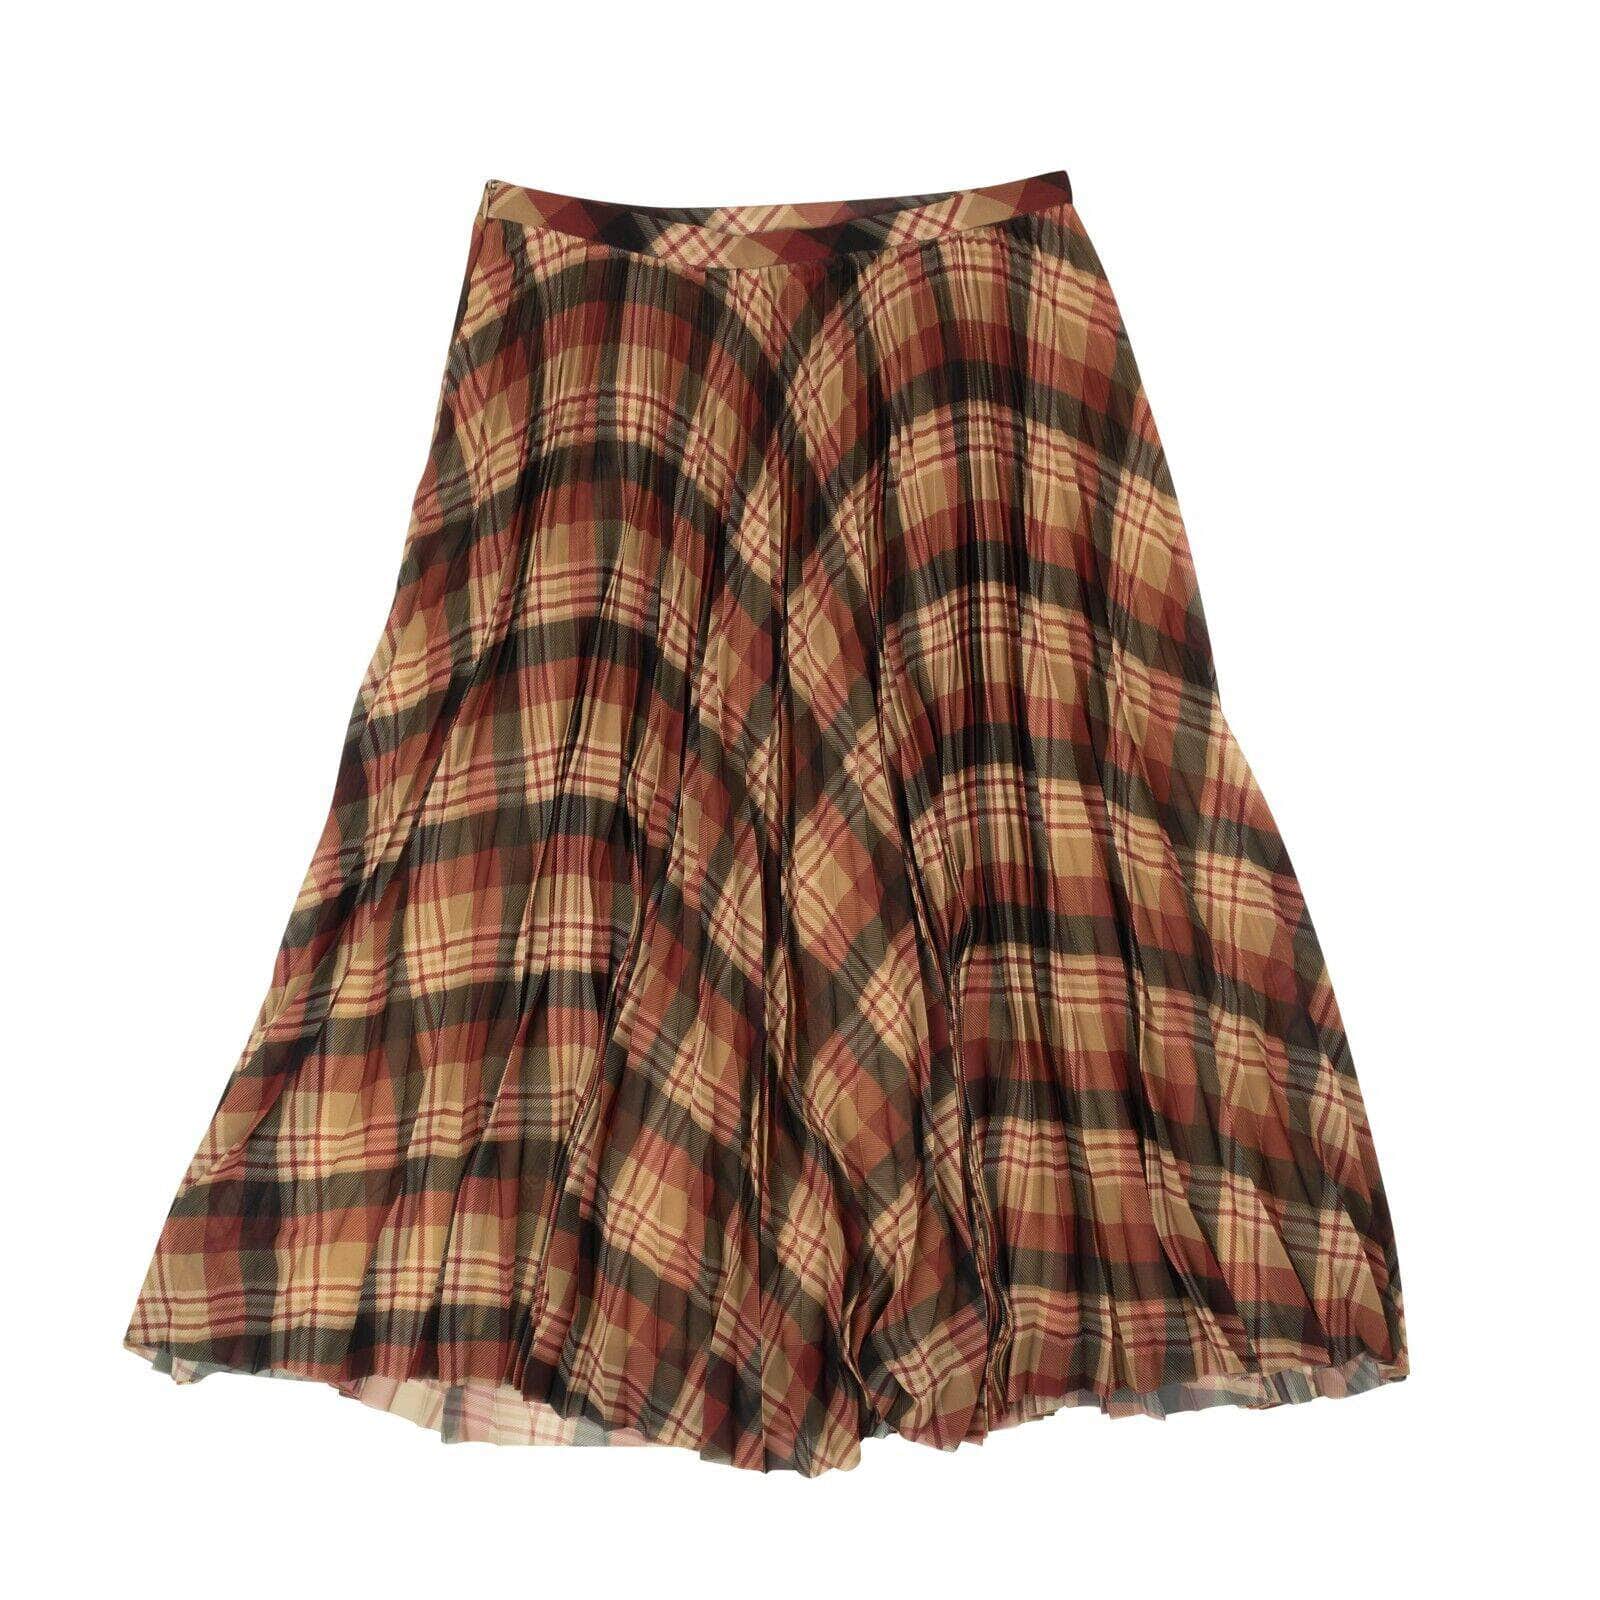 Dries Van Noten 1000-2000, channelenable-all, chicmi, couponcollection, dries-van-noten, gender-womens, main-clothing, size-38, size-40, womens-flared-skirts 38 / 202-10830-1228-976 Multicolor Sax Plaid Pleated Skirt 95-DVN-0029/38 95-DVN-0029/38